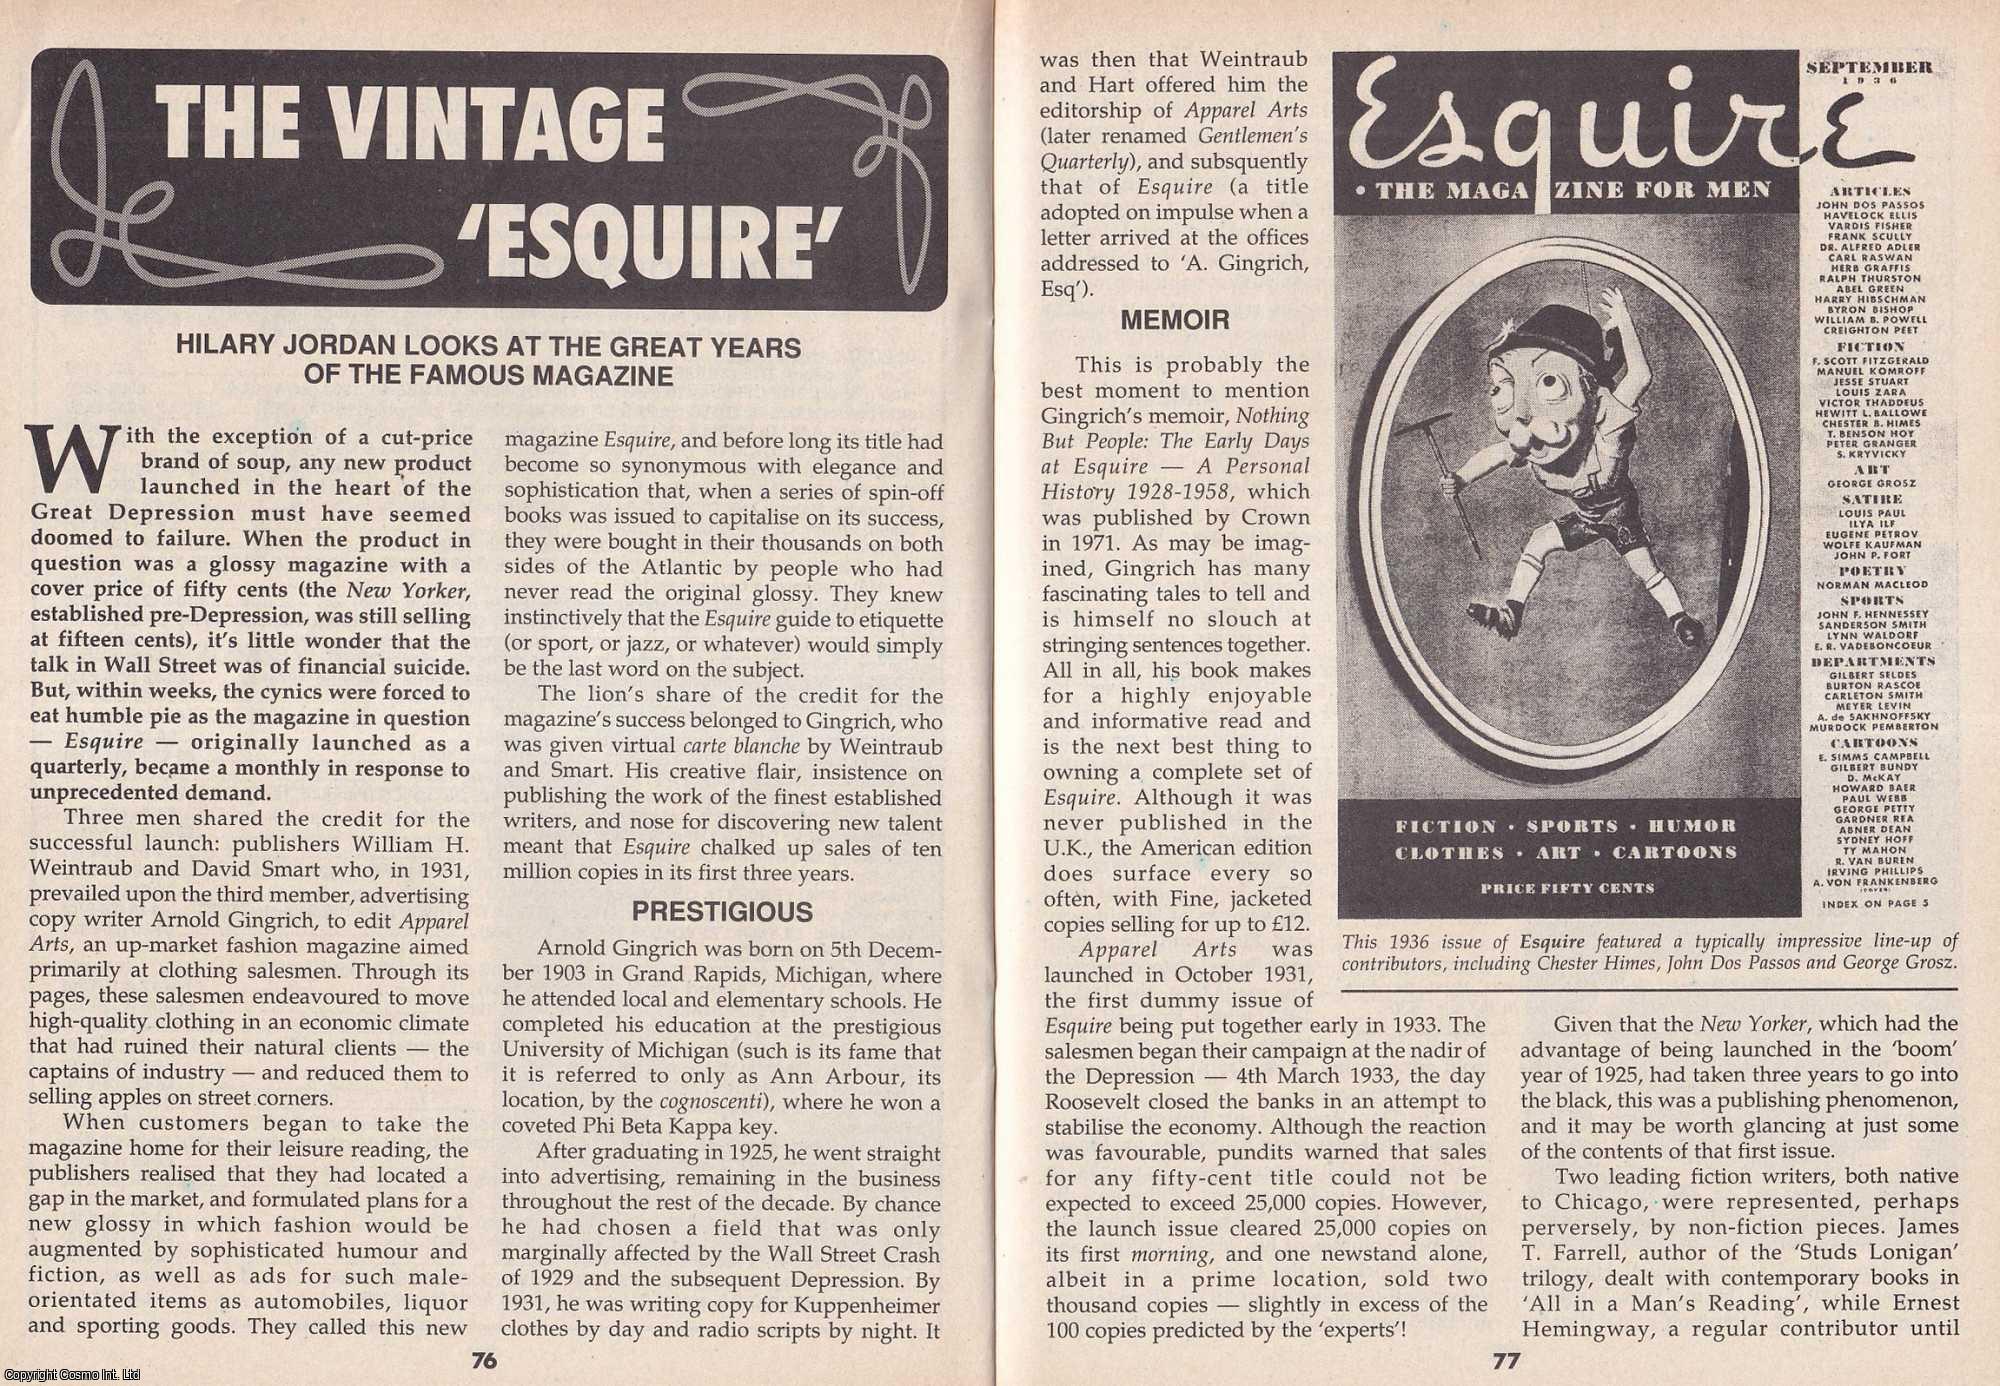 Hilary Jordan - The Vintage Esquire. Looking at The Great Years of The Famous Magazine. This is an original article separated from an issue of The Book & Magazine Collector publication.